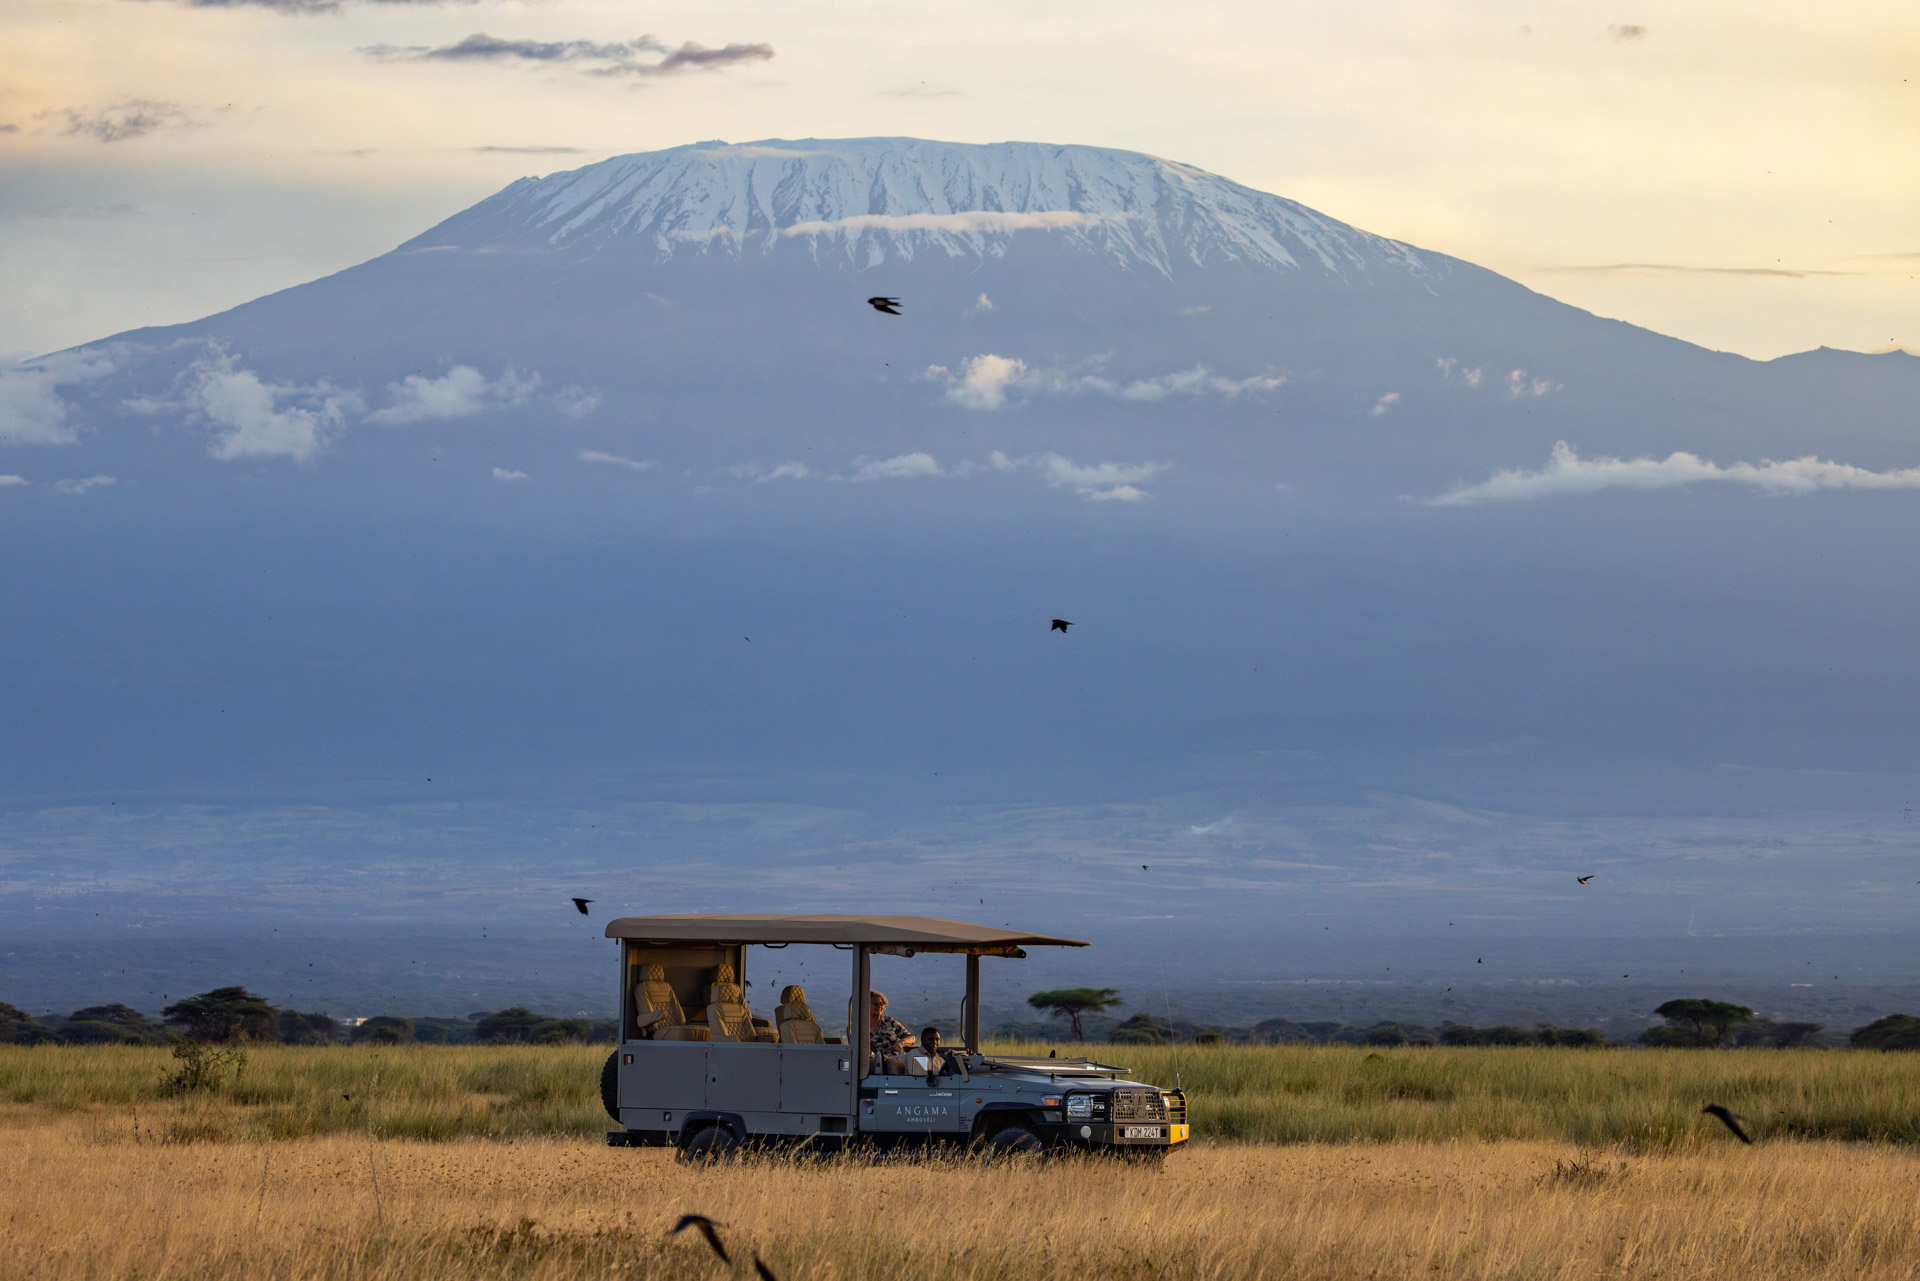 The Amboseli grey blending in beautifully with the mountain 